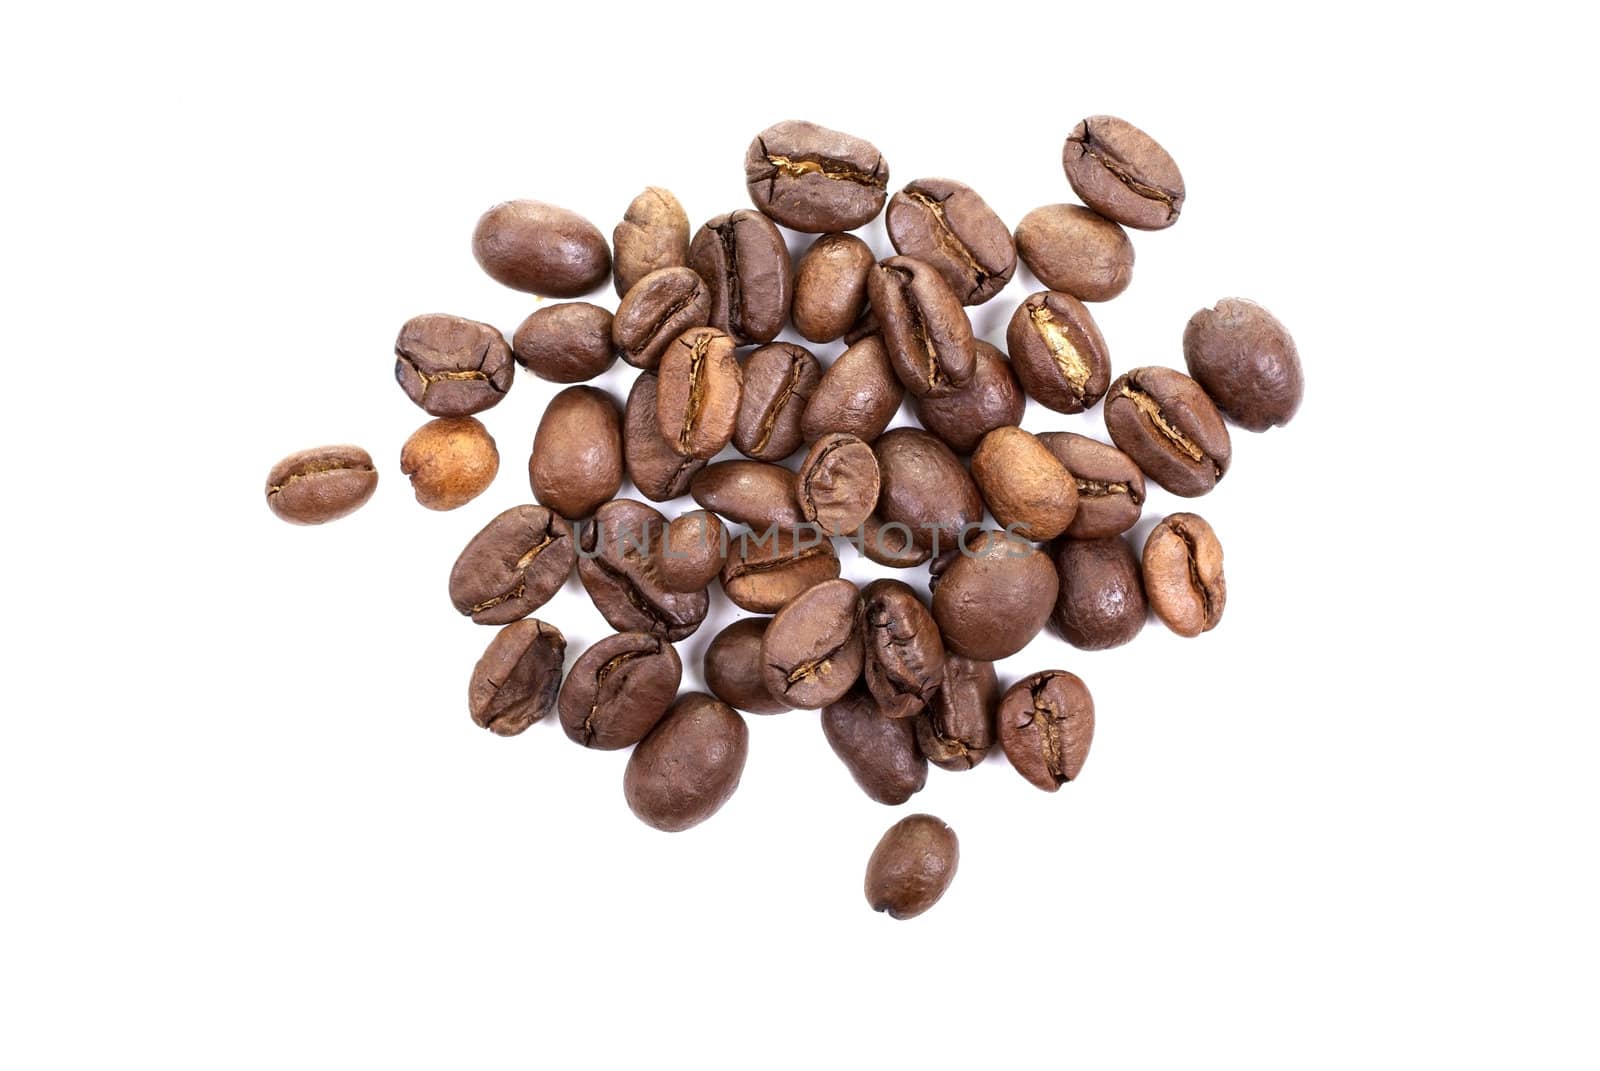 Heap of brown roasted coffee beans isolated on white background.